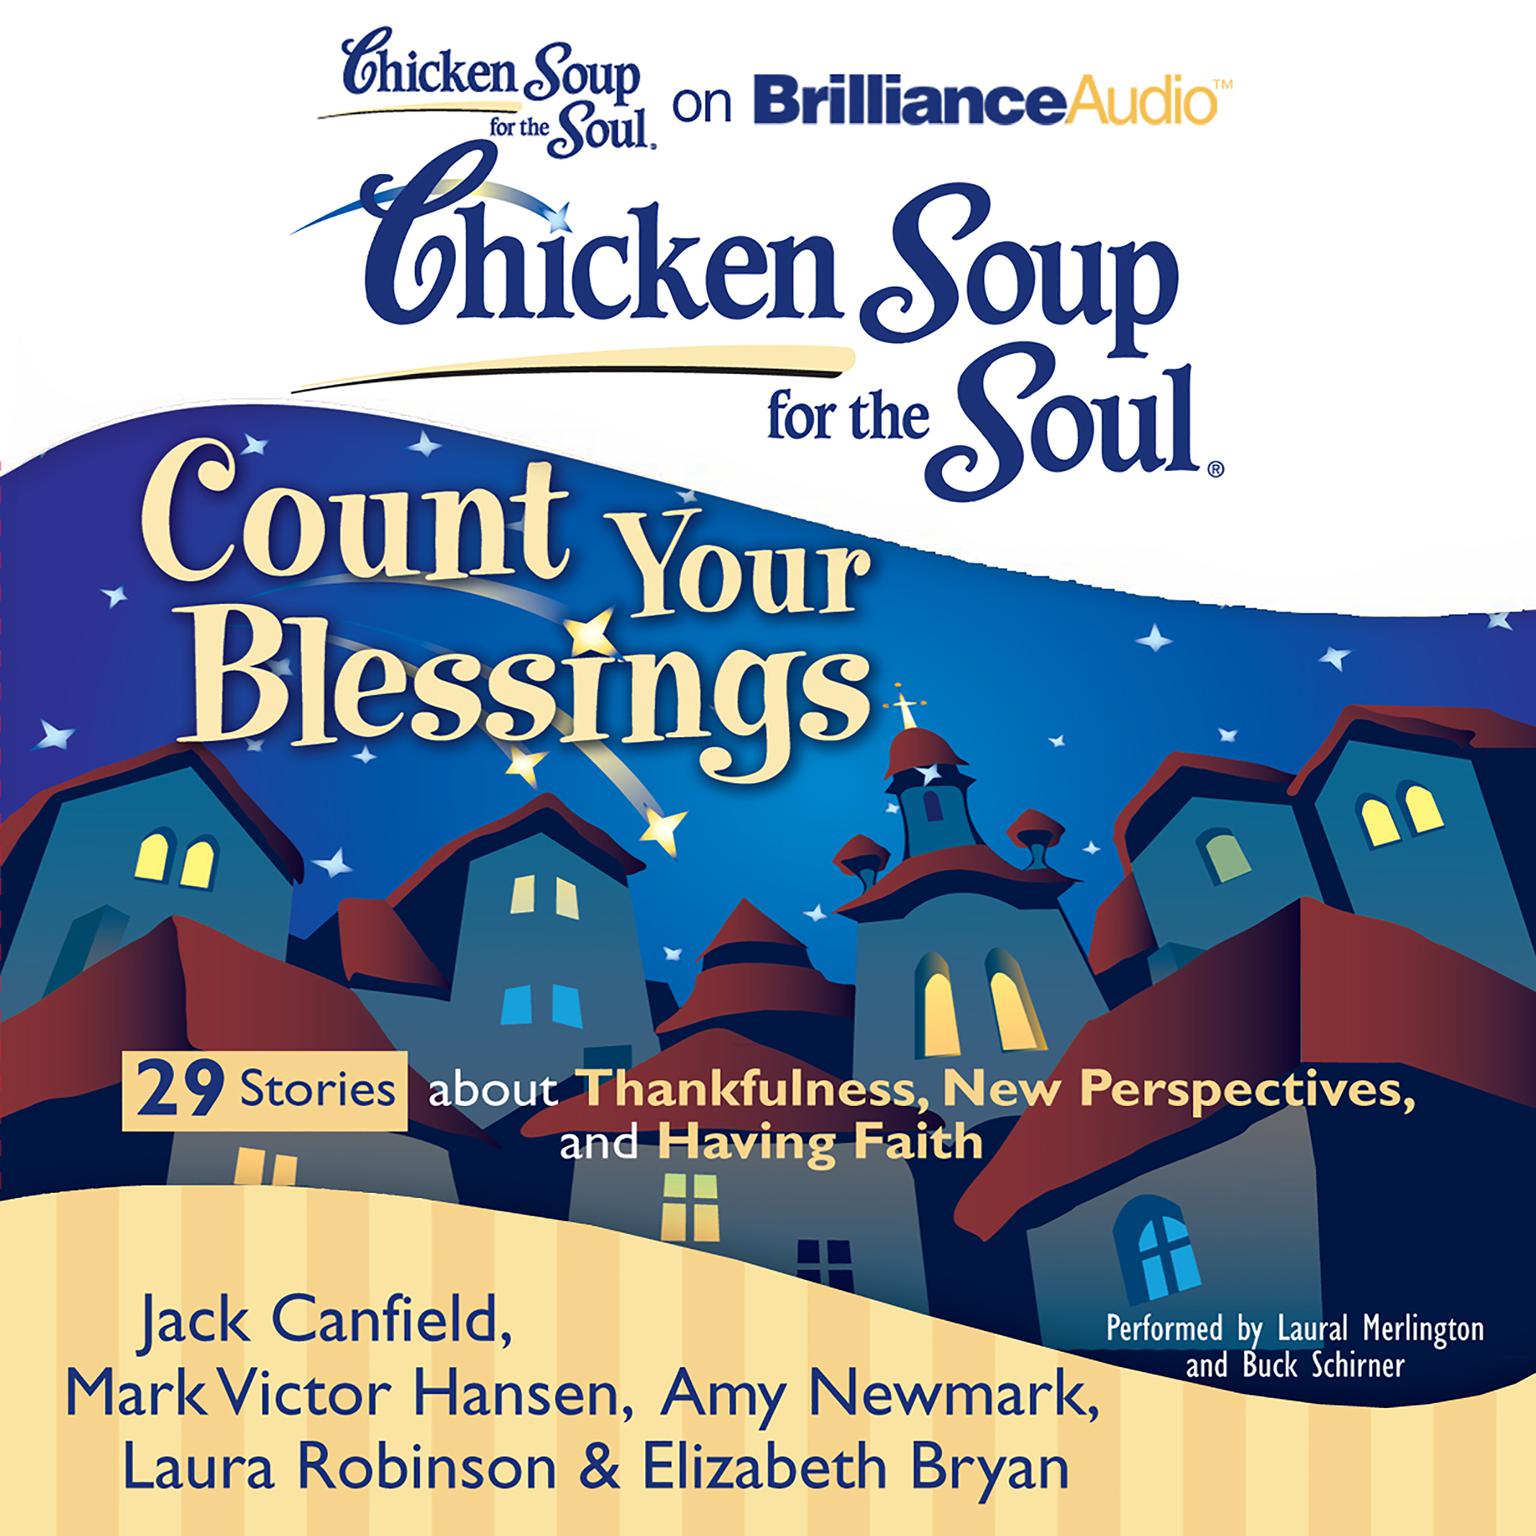 Chicken Soup for the Soul: Count Your Blessings - 29 Stories about Thankfulness, New Perspectives, and Having Faith Audiobook, by Jack Canfield